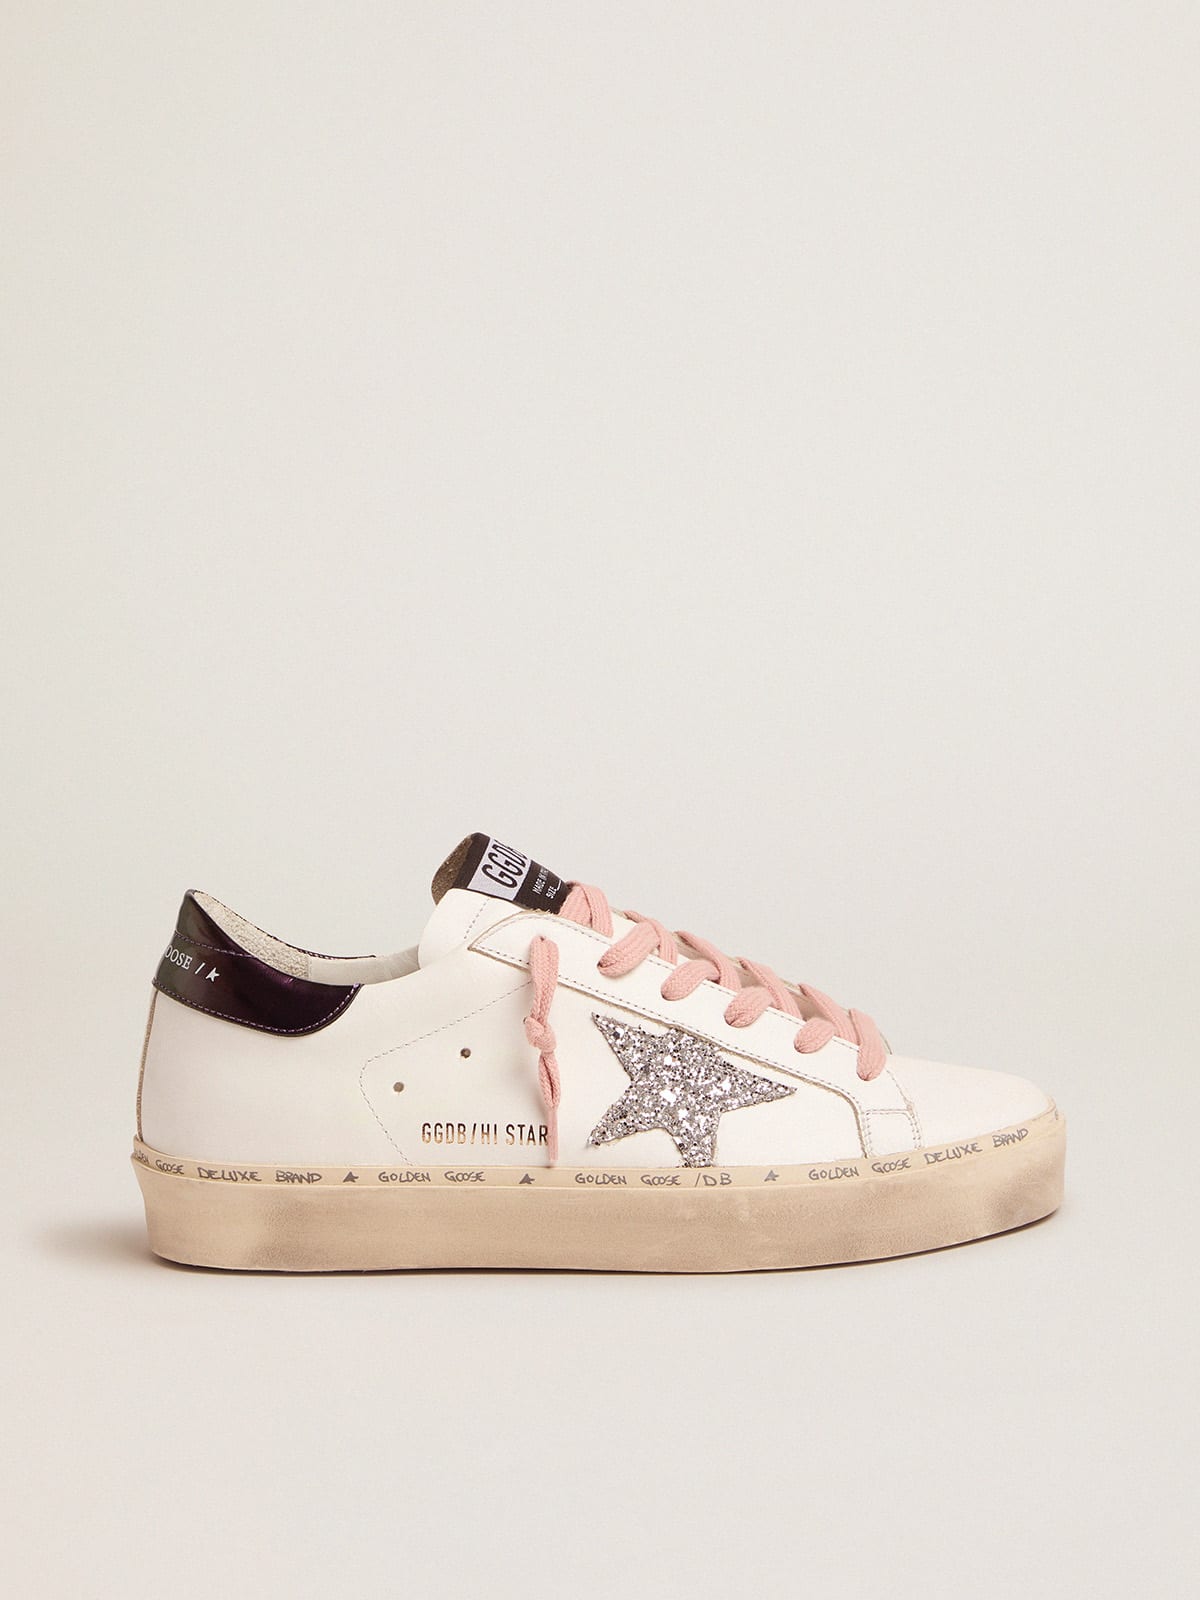 White Hi-Star sneakers with glittery star and pink laces | Golden Goose